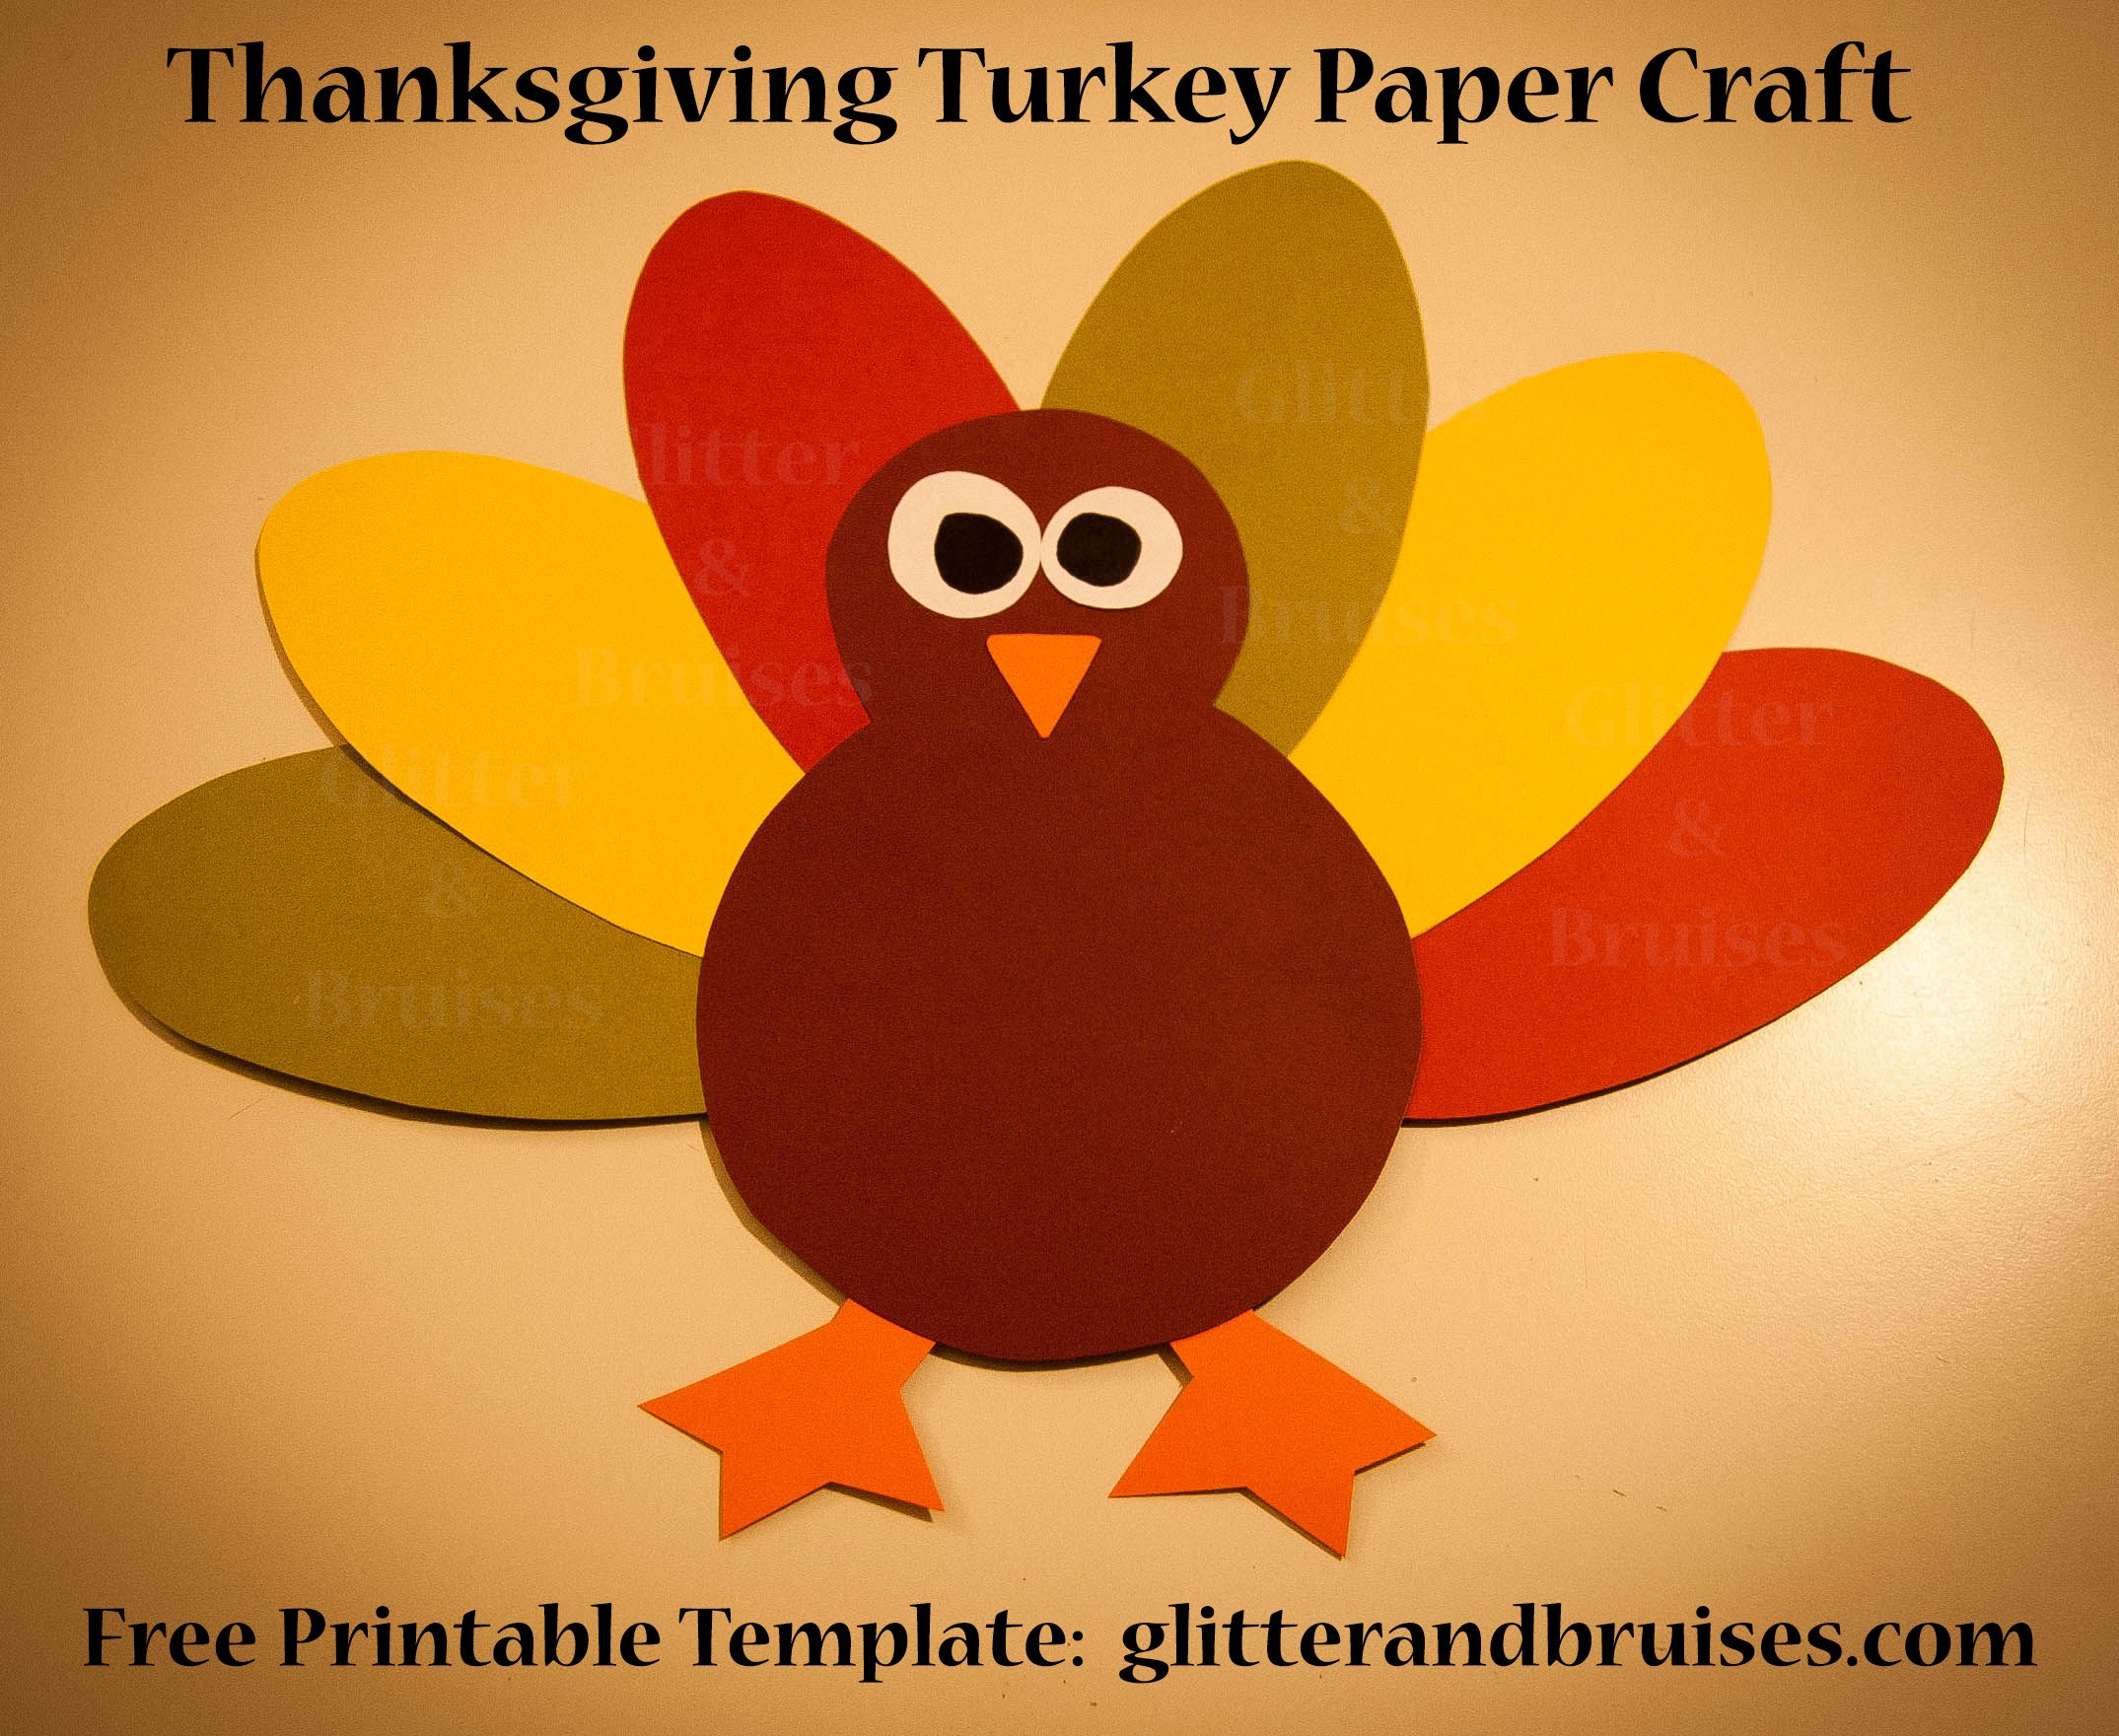 Pinglitter And Bruises On Thanksgiving | Pinterest | Paper - Free Printable Thanksgiving Turkey Template